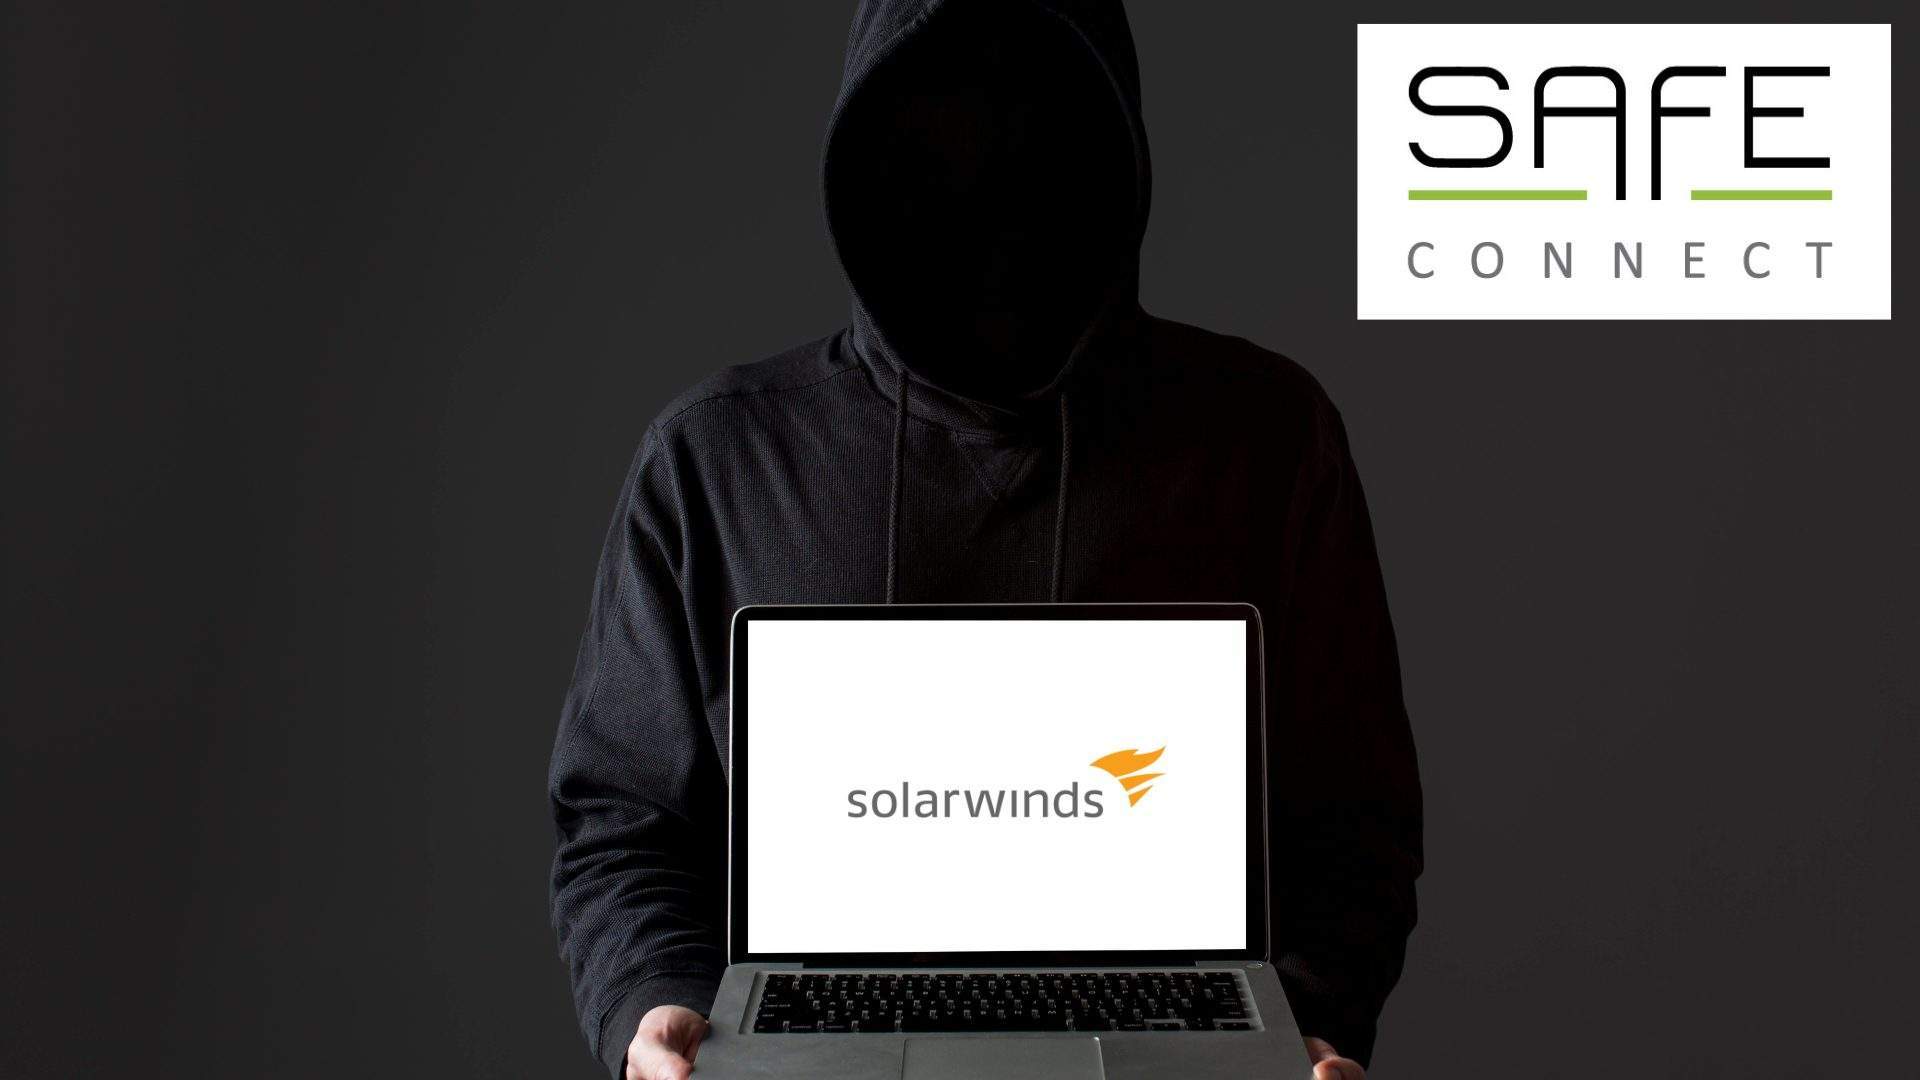 The attack on SolarWinds